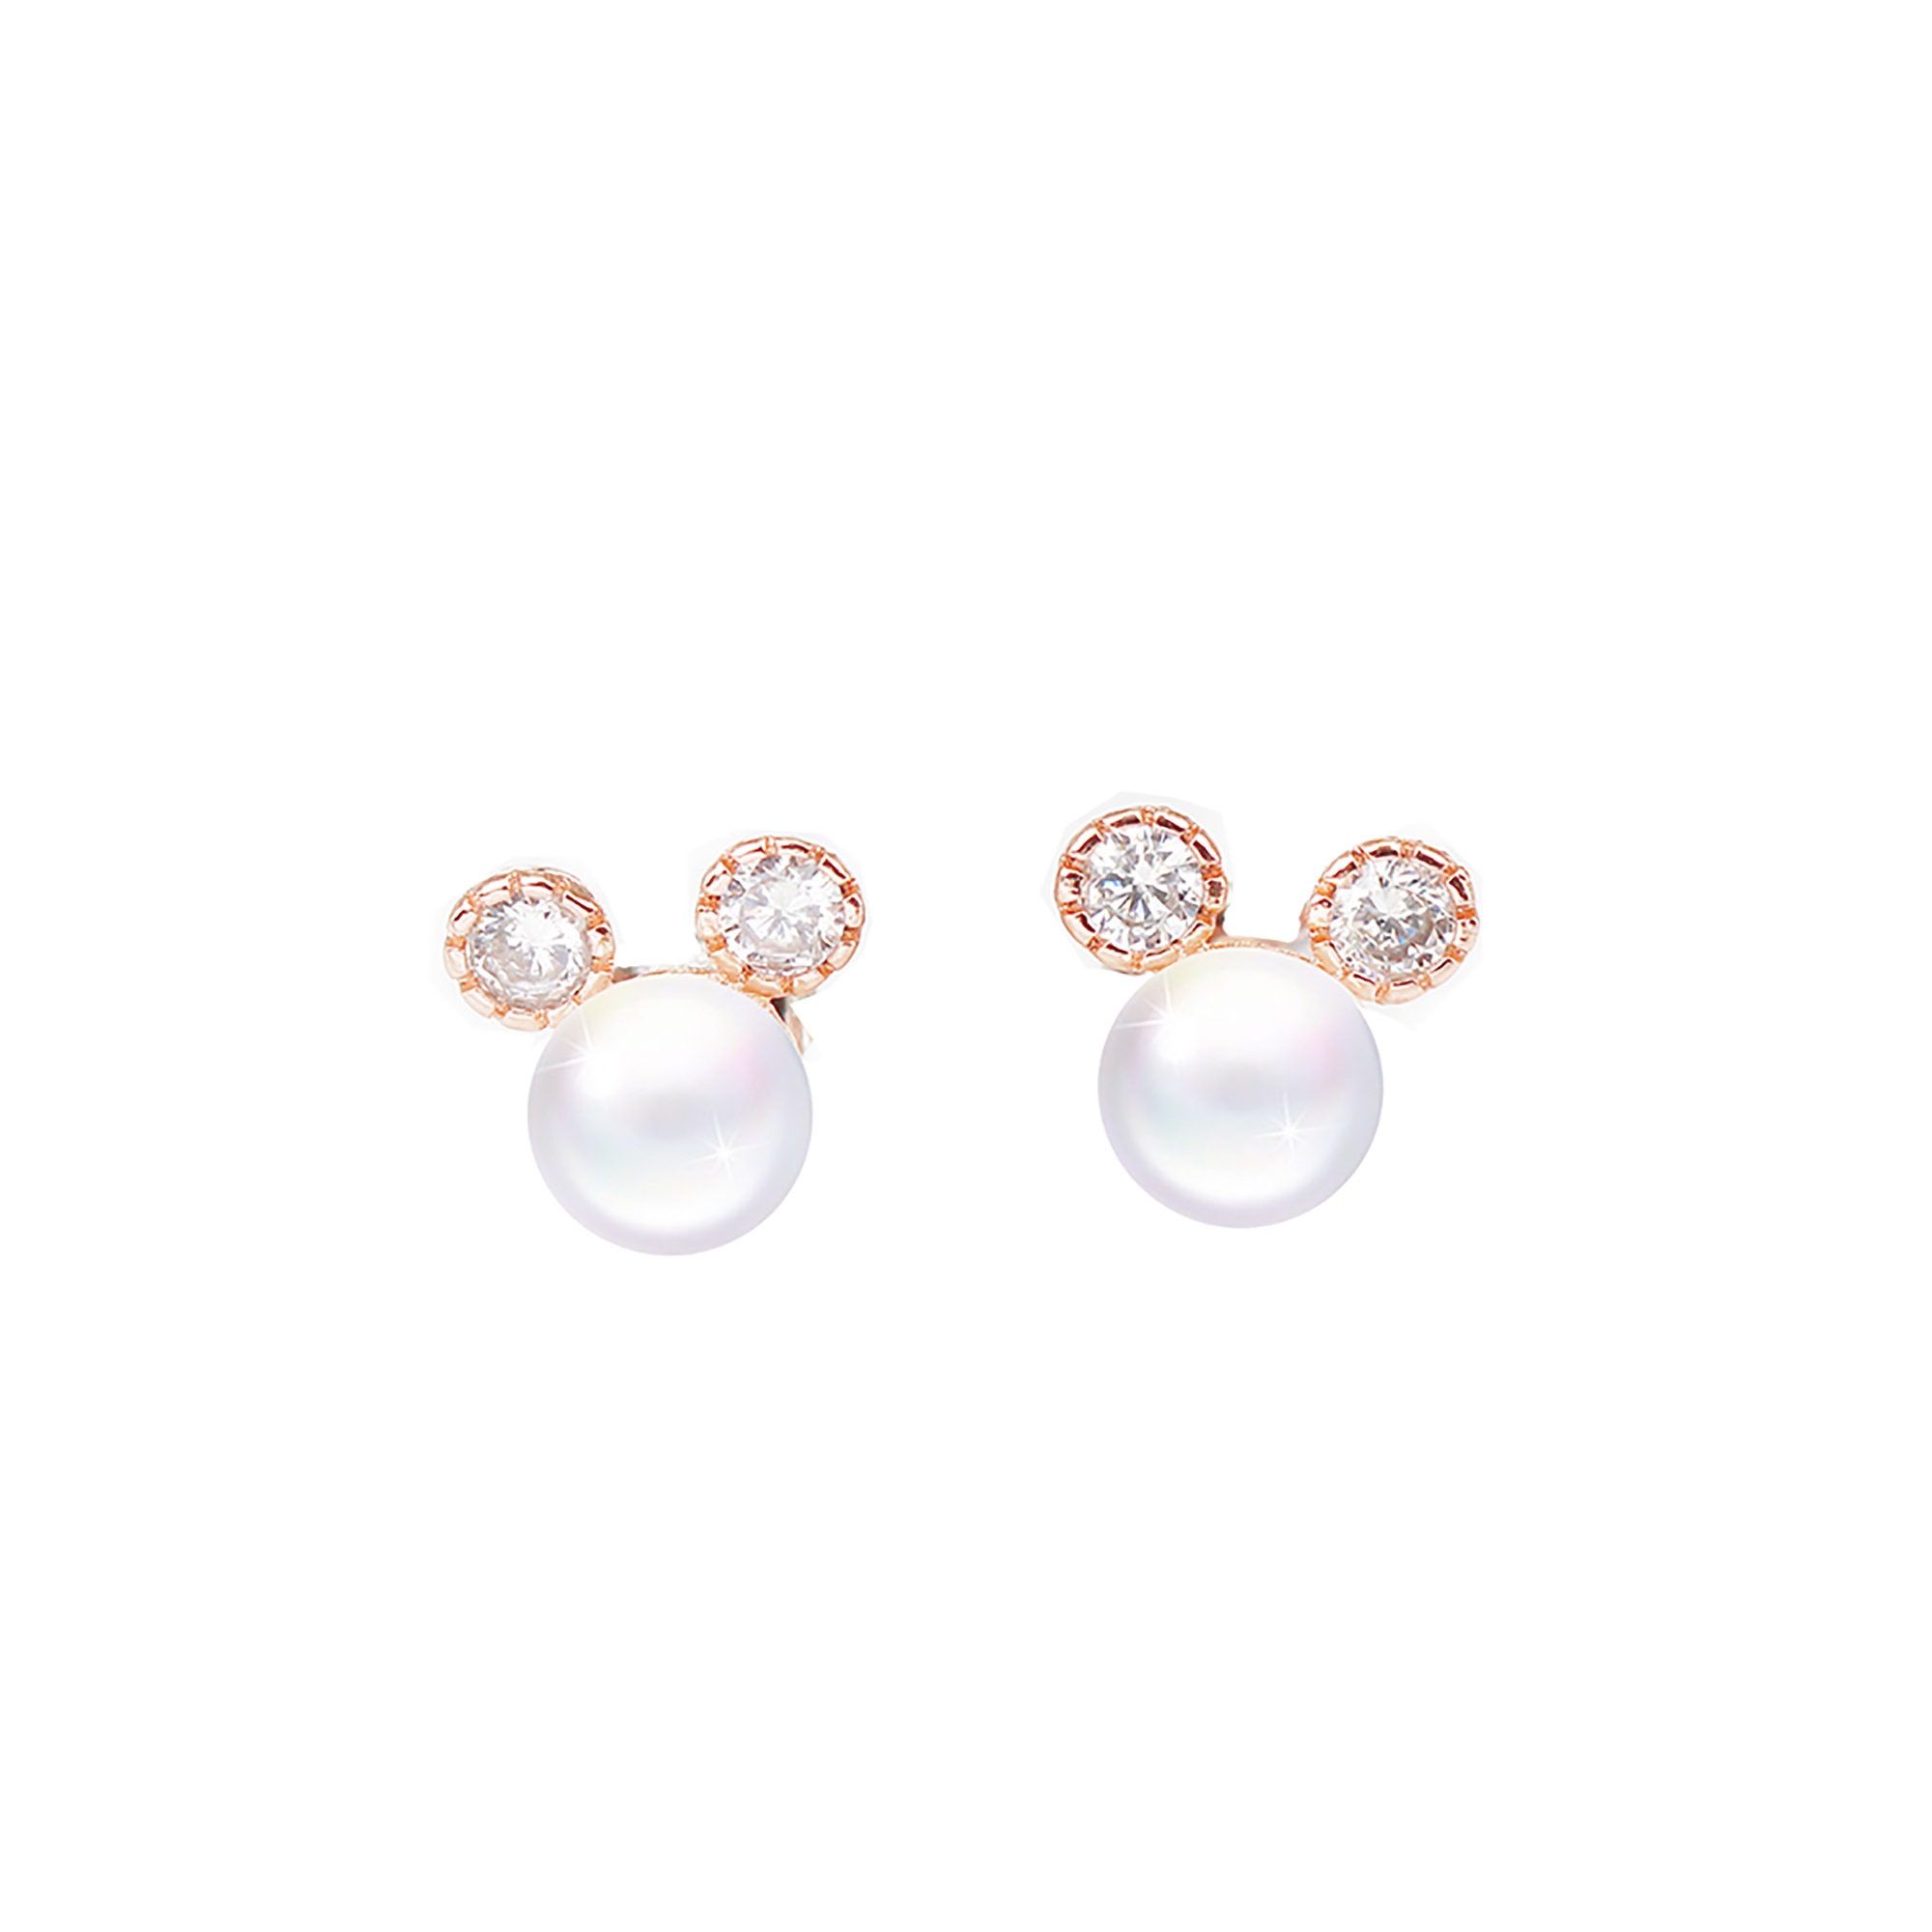 Round Cut Cubic Zirconia Mickey Mouse Stud Earrings In 14k Rose Gold Over  Sterling Silver - Walmart.com